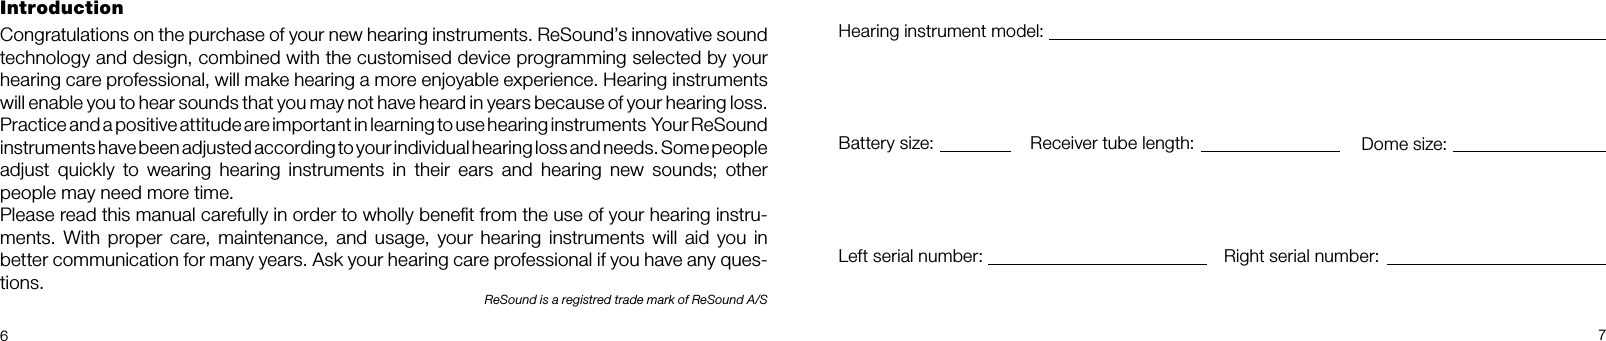 67IntroductionCongratulations on the purchase of your new hearing instruments. ReSound’s innovative sound technology and design, combined with the customised device programming selected by your  hearing care professional, will make hearing a more enjoyable experience. Hearing instruments will enable you to hear sounds that you may not have heard in years because of your hearing loss. Practice and a positive attitude are important in learning to use hearing instruments  Your ReSound instruments have been adjusted according to your individual hearing loss and needs. Some people  adjust  quickly  to  wearing  hearing  instruments  in  their  ears  and  hearing  new  sounds;  other  people may need more time.Please read this manual carefully in order to wholly beneﬁt from the use of your hearing instru-ments. With  proper  care, maintenance, and  usage,  your hearing  instruments will  aid  you in better communication for many years. Ask your hearing care professional if you have any ques-tions.ReSound is a registred trade mark of ReSound A/SHearing instrument model:Battery size: Receiver tube length: Dome size:Left serial number: Right serial number: